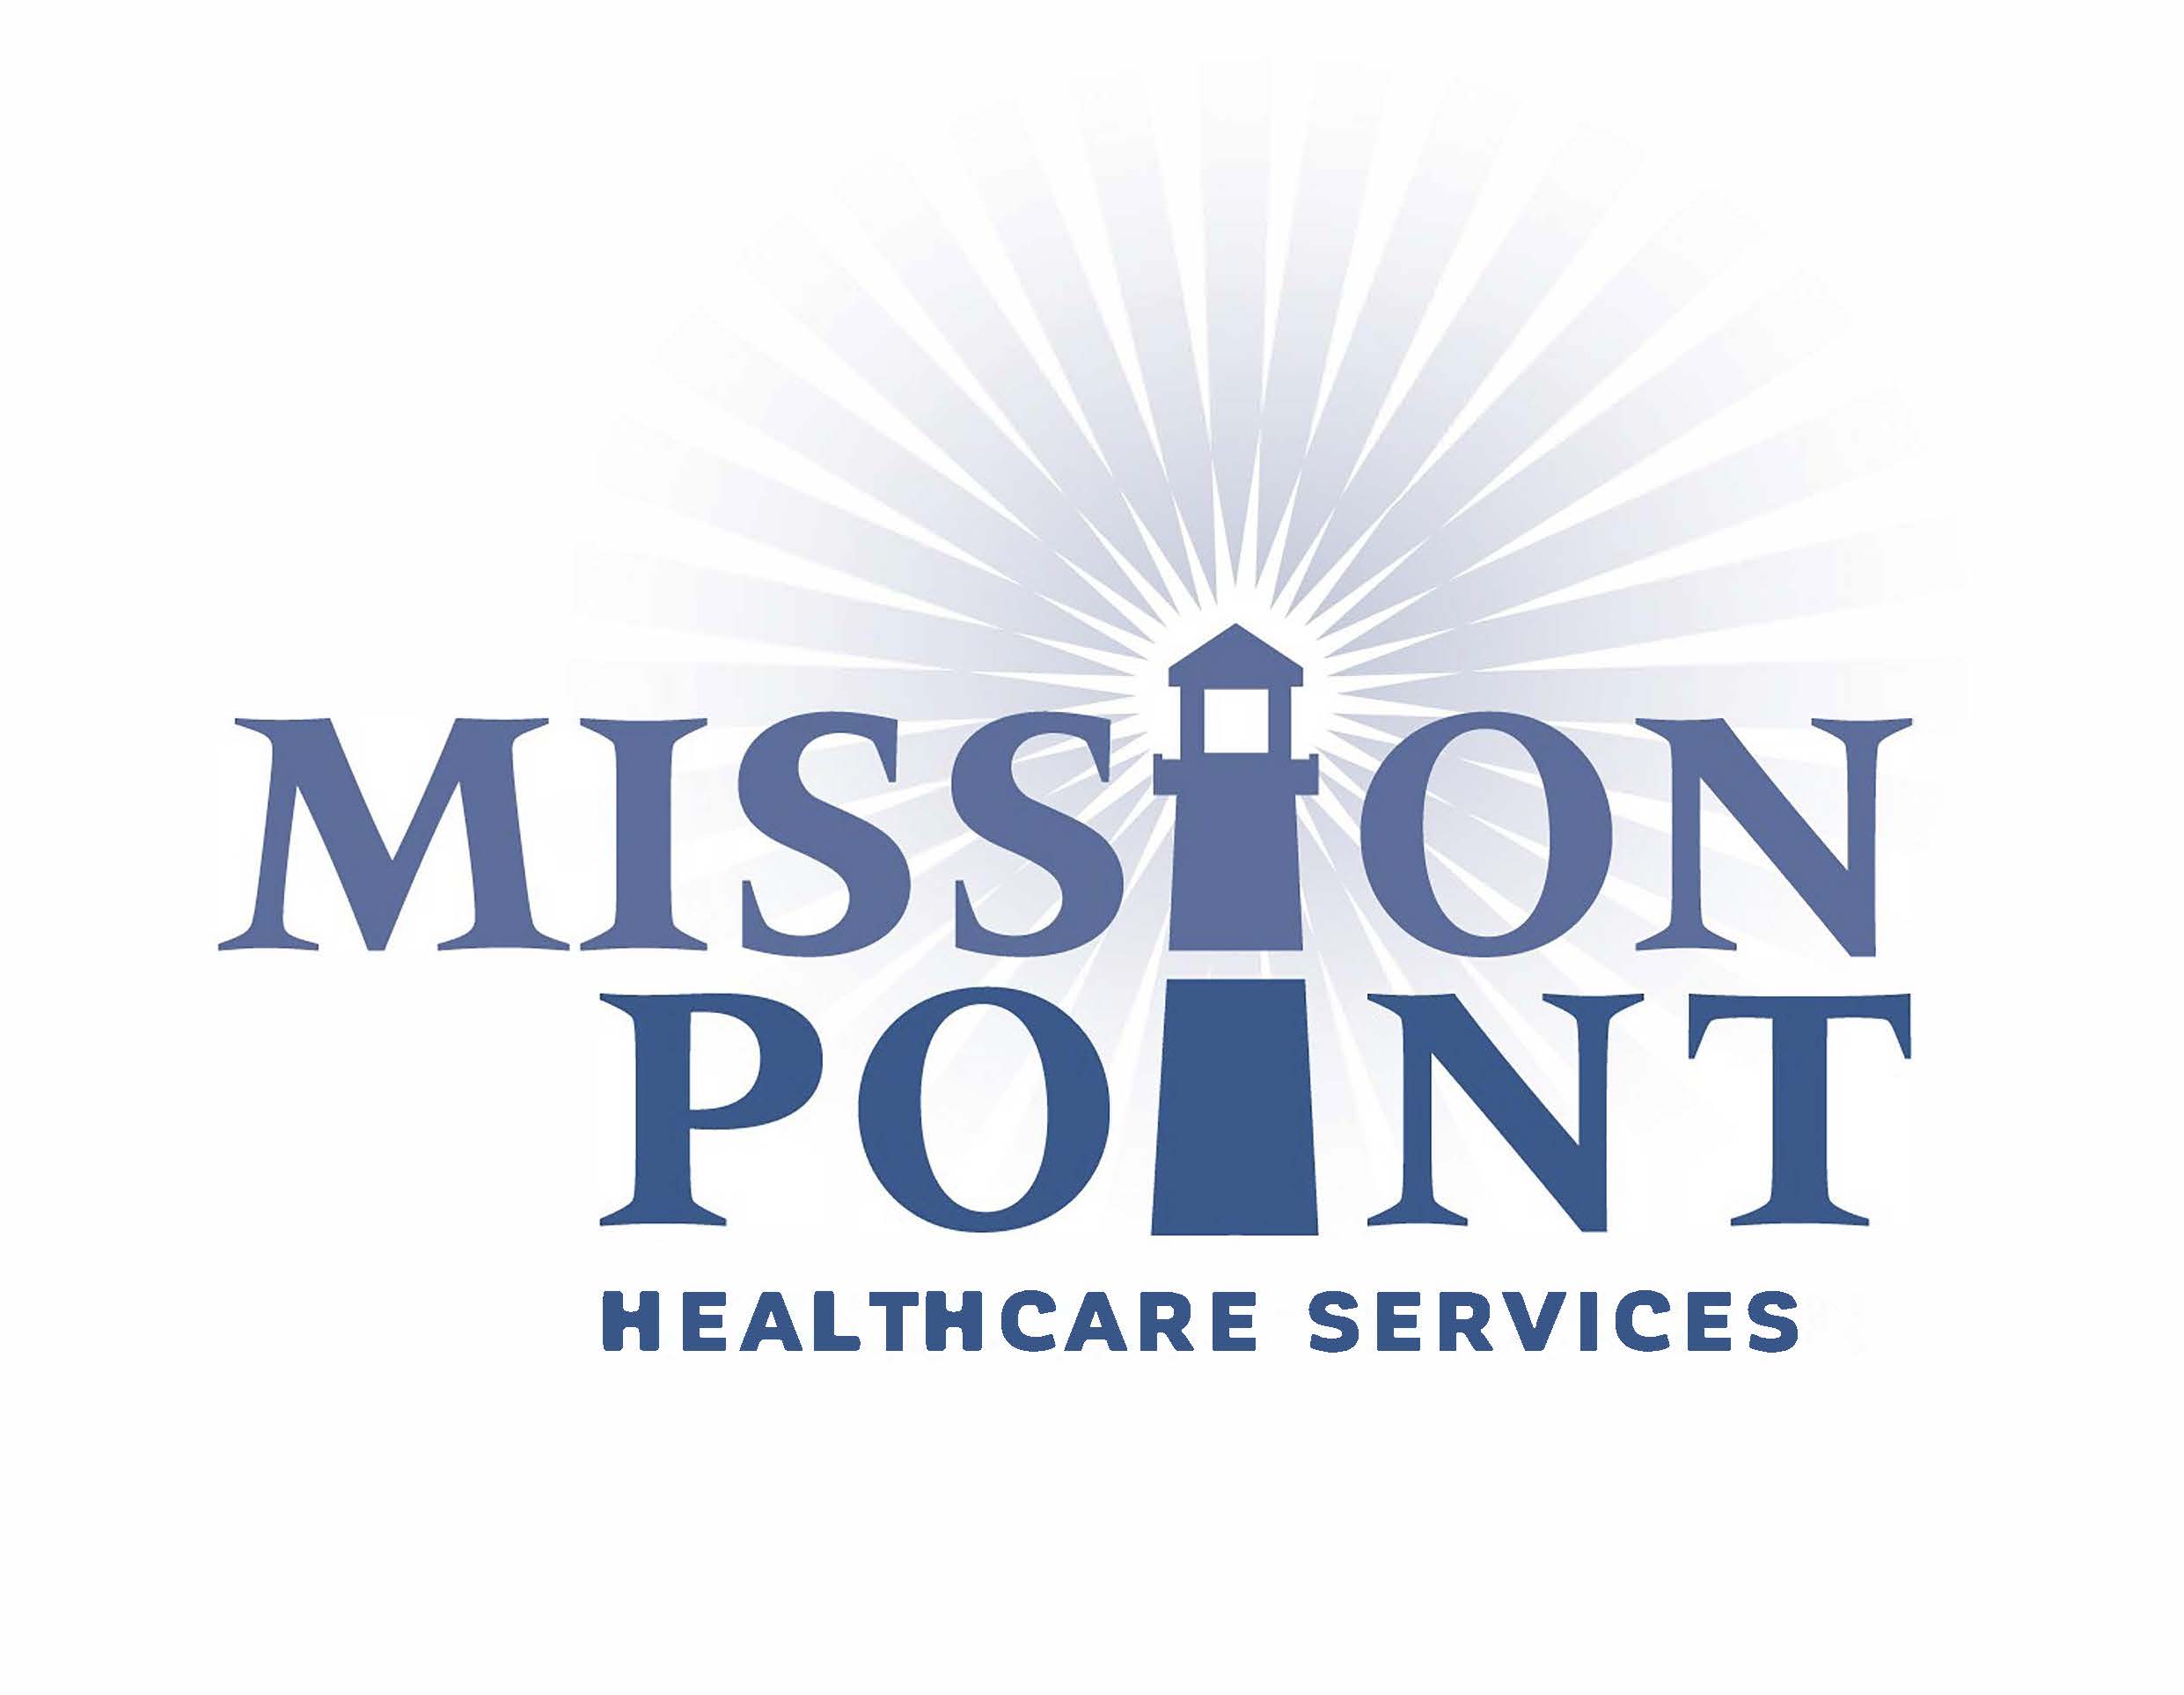 MissionPointHealthcareServices_LOGO